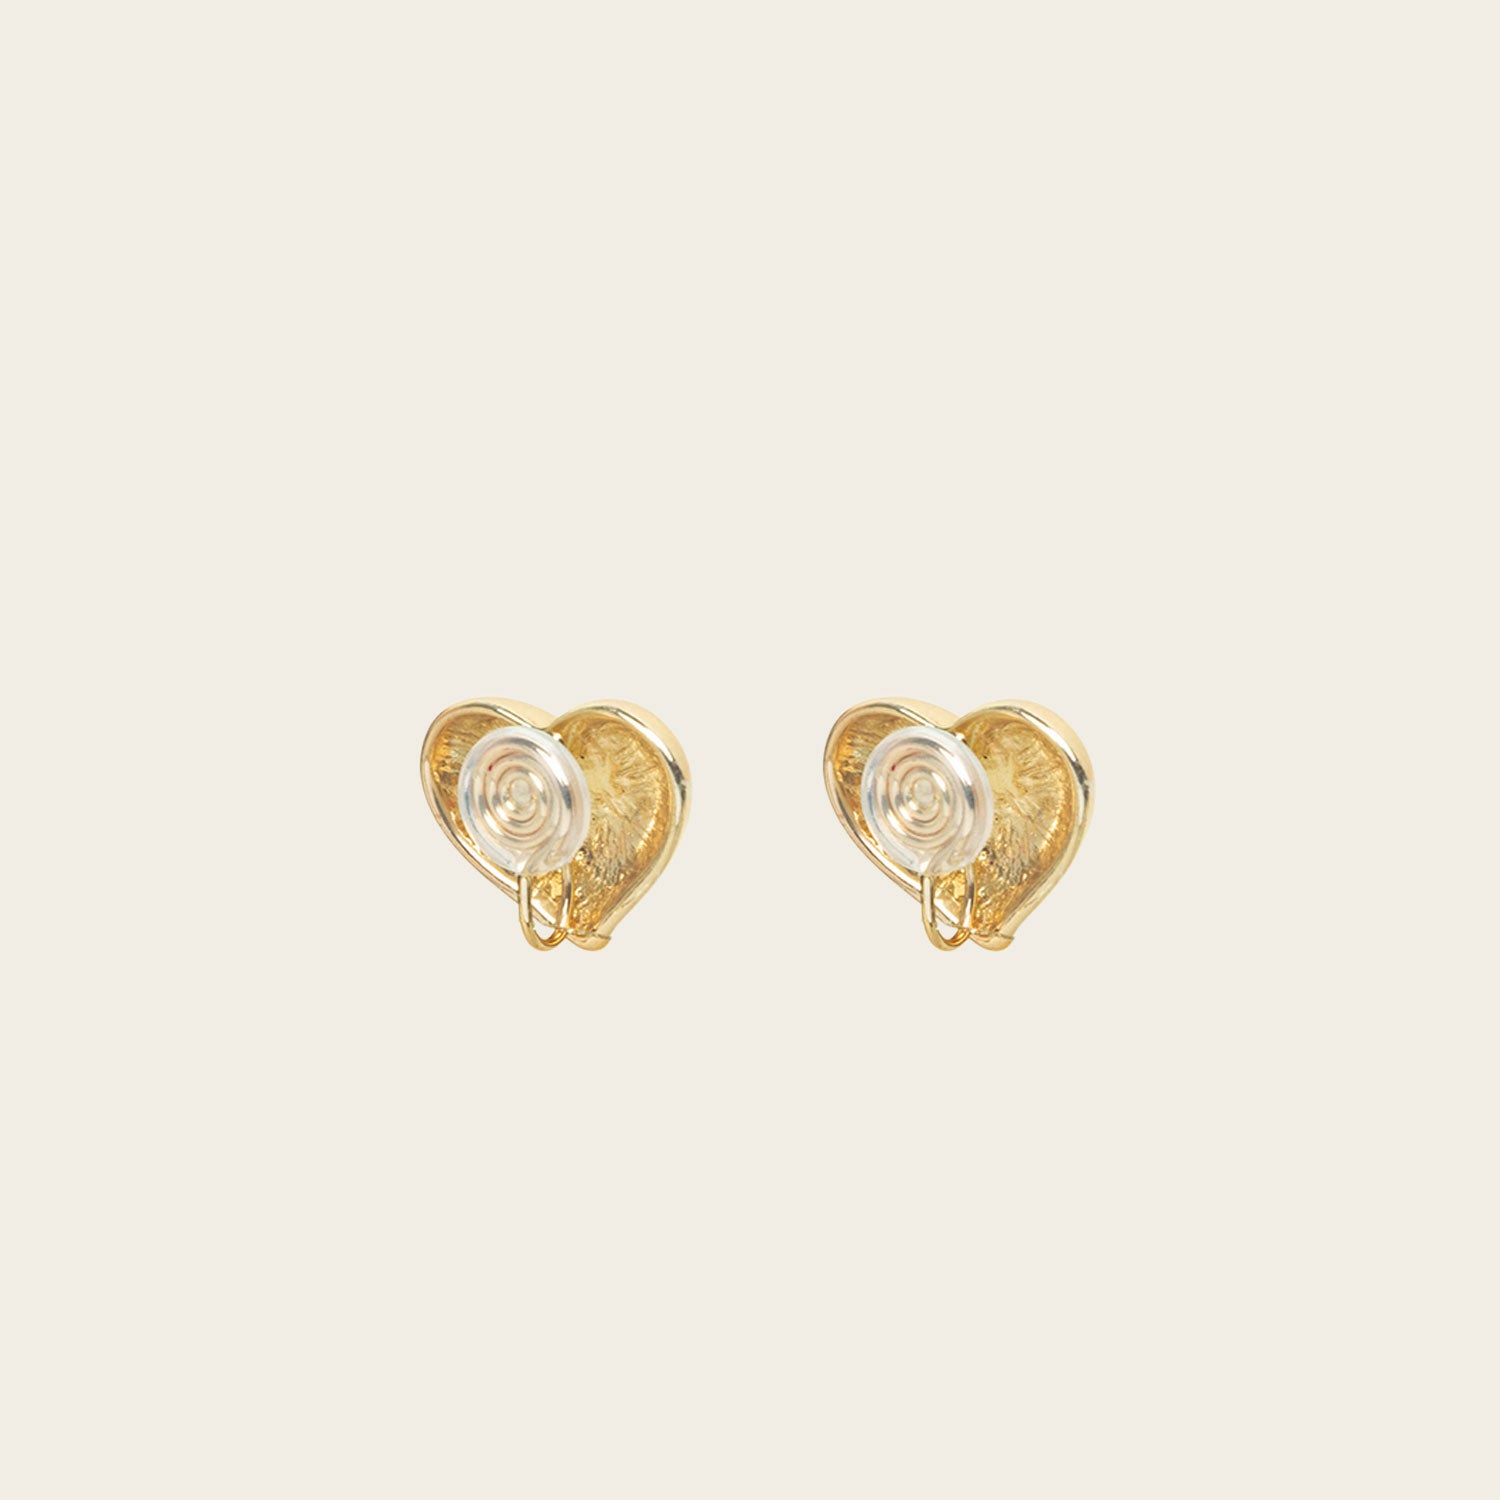 Image of the Coeur Clip On Earrings in Gold offer a medium-strength, adjustable hold via a mosquito coil clip. Ideal for all ear types, these earrings provide a secure yet comfortable fit for up to 24 hours. Crafted with Zinc Alloy and Copper, each purchase contains a single pair.